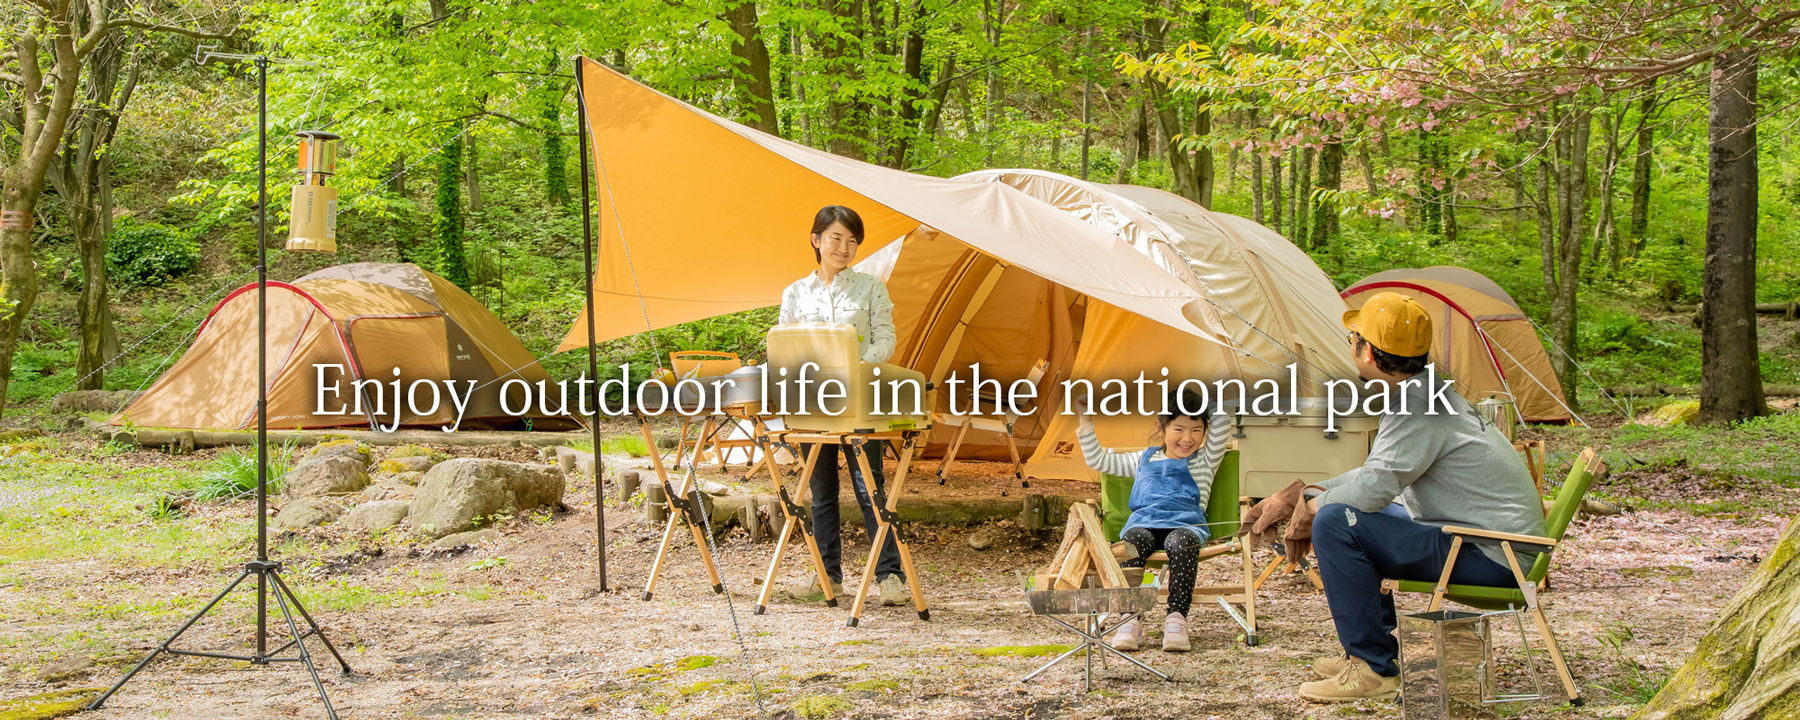 Enjoy outdoor life in the national park